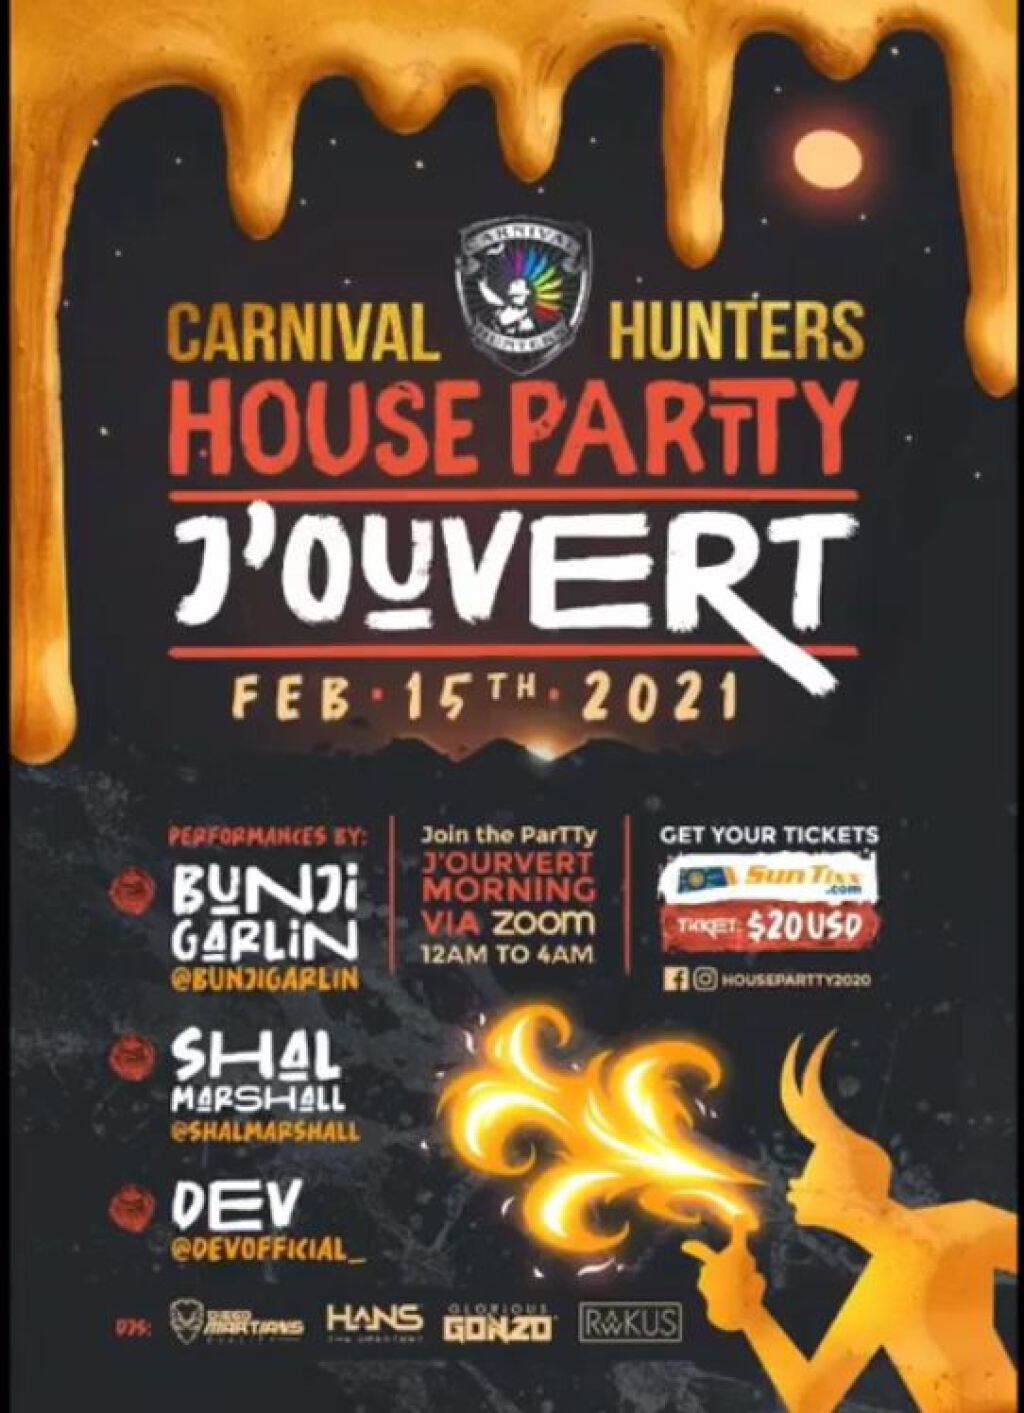 House Party J'ouvert flyer or graphic.